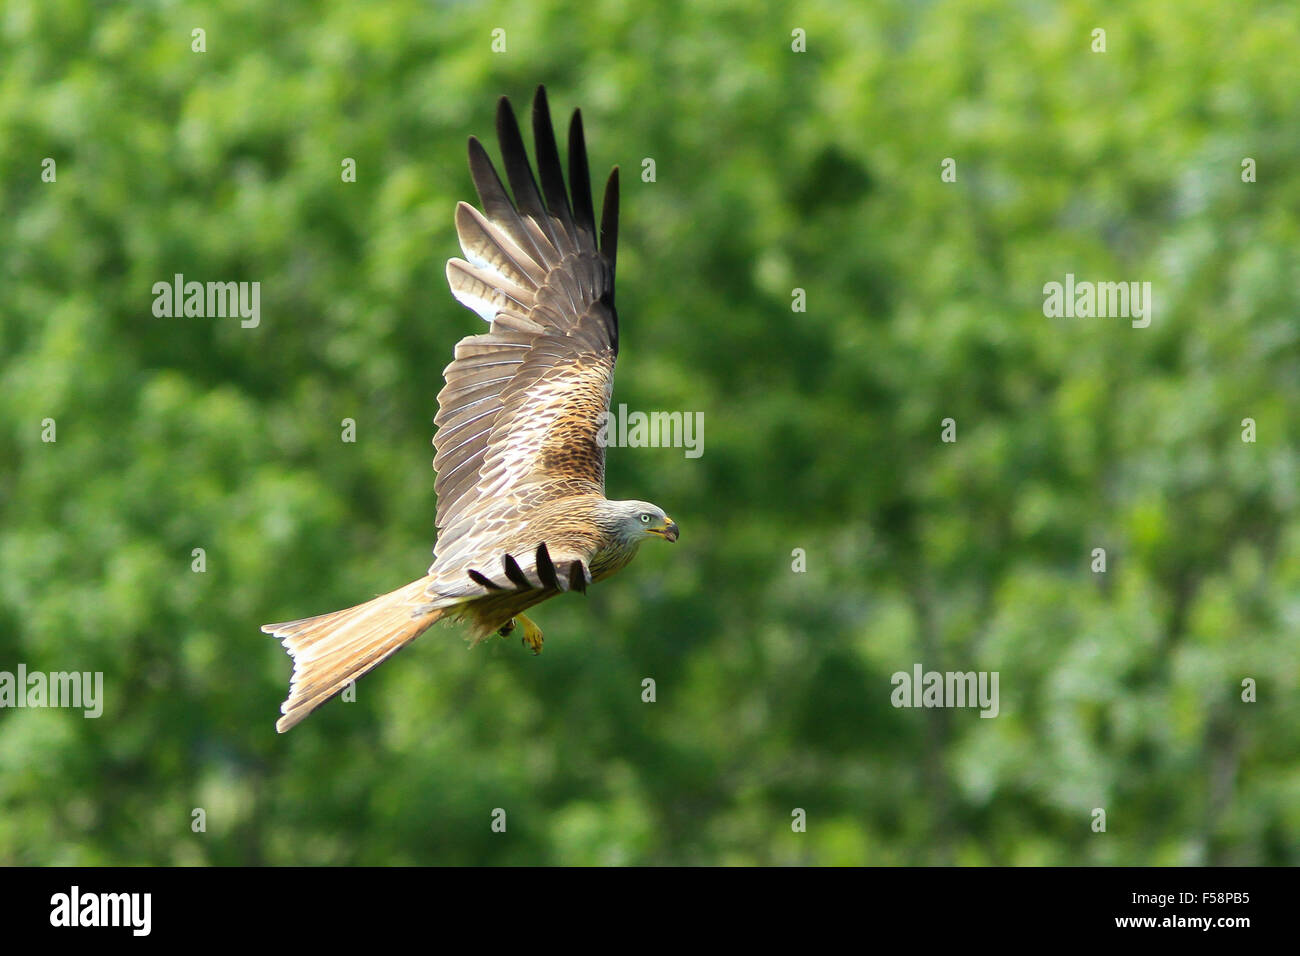 A Red kite flies across a green background in Dumfries and Galloway, Scotland Stock Photo